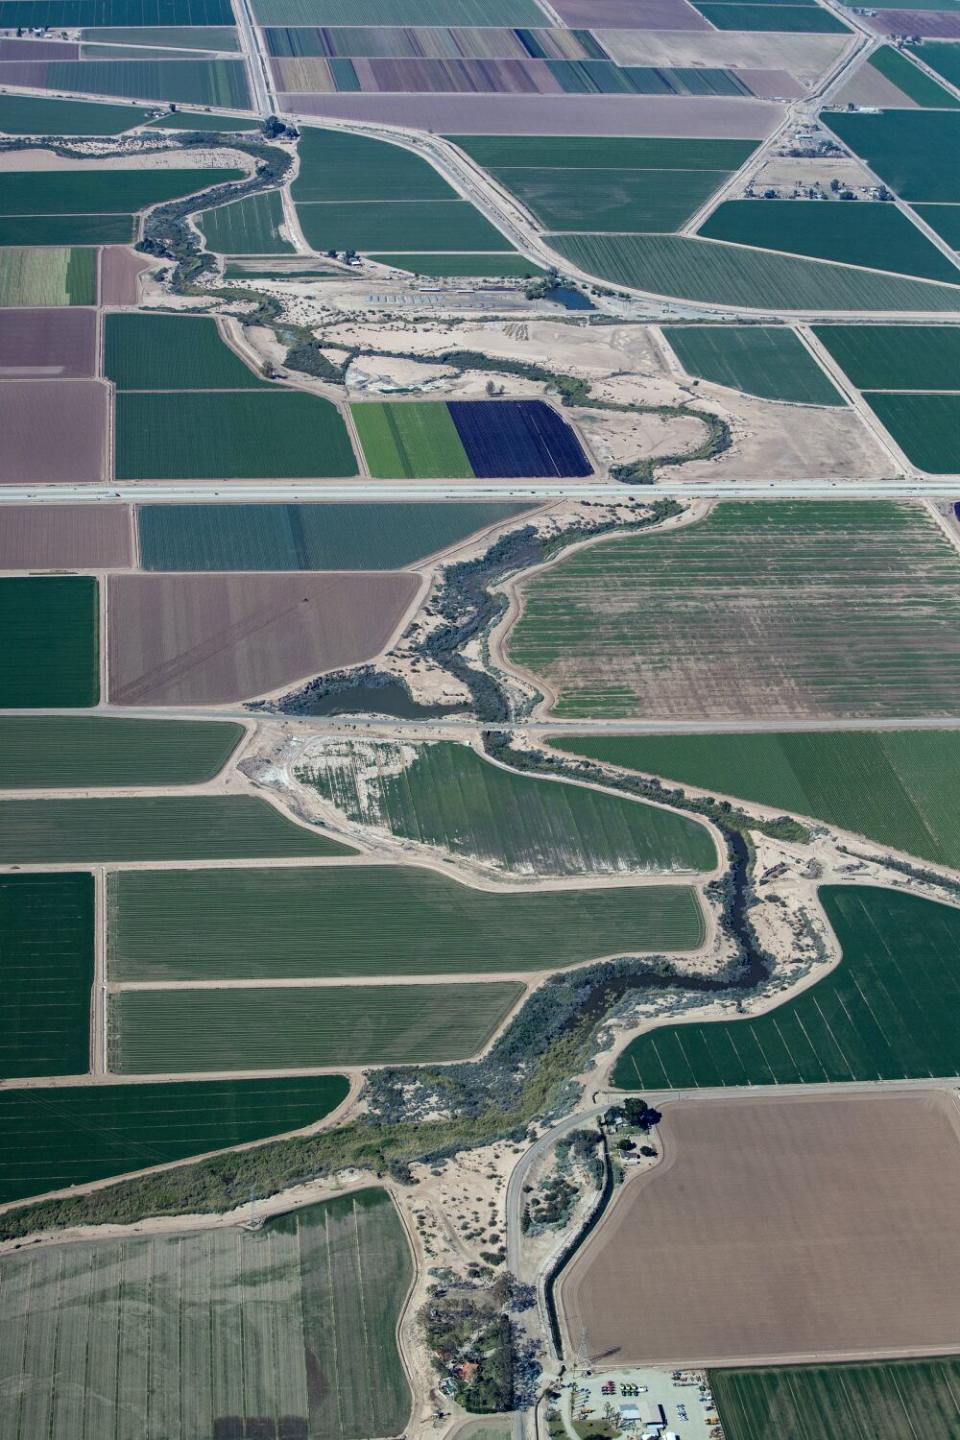 A vertical aerial view of Imperial Valley farmland lots